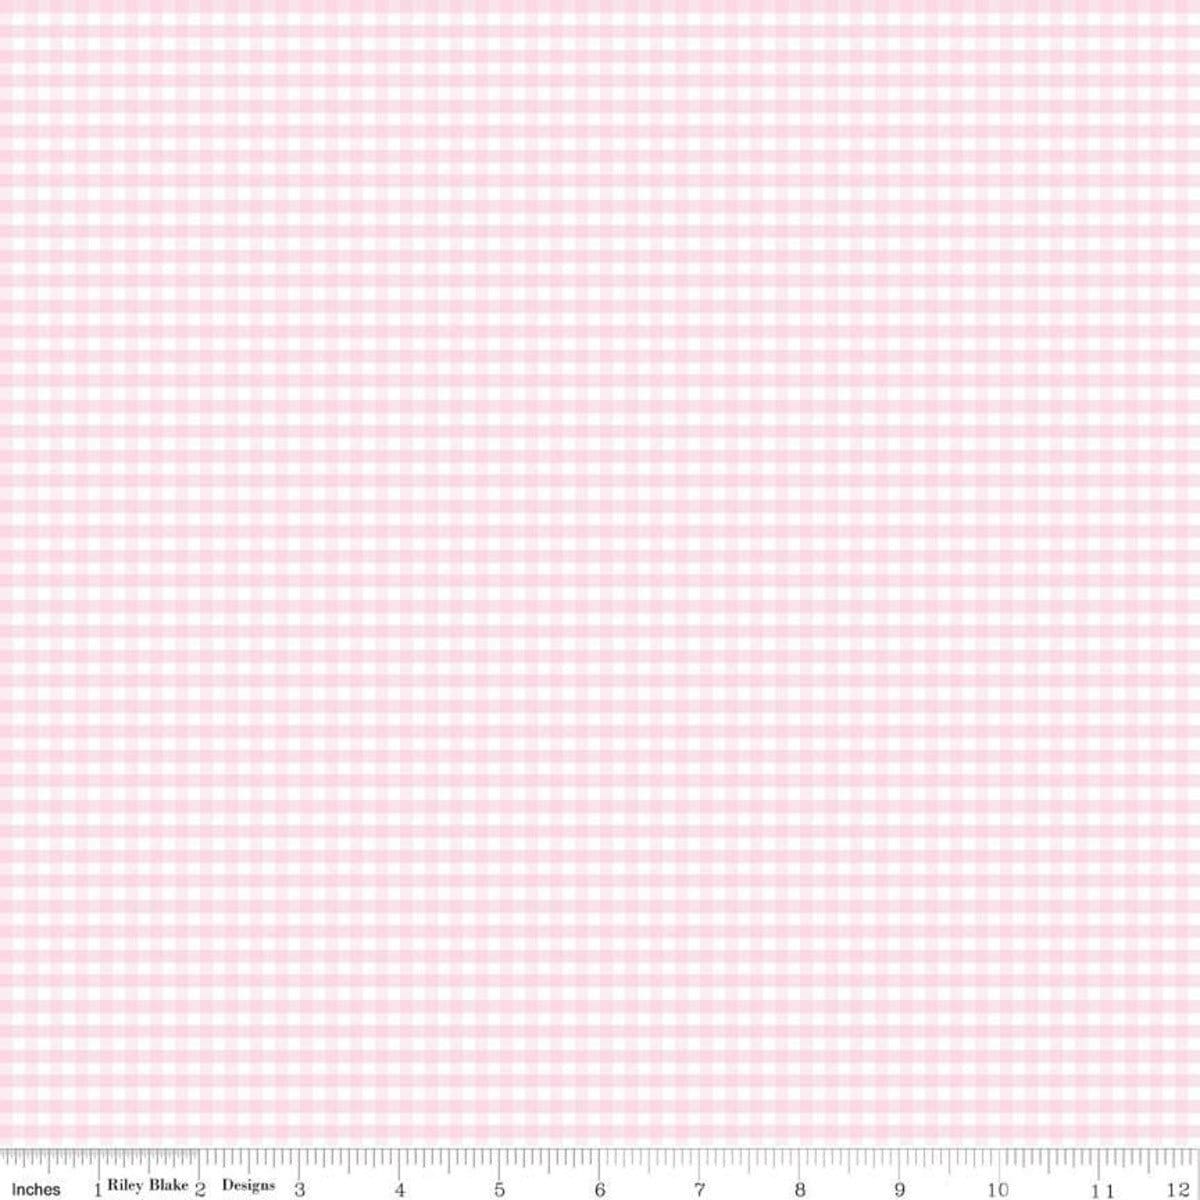 Baby Pink Small Gingham - By The Half Yard - BTHY - 1/8” Gingham - Pink Fabric - Riley Blake Fabric - Riley Blake Gingham - C440-75 BABYPINK